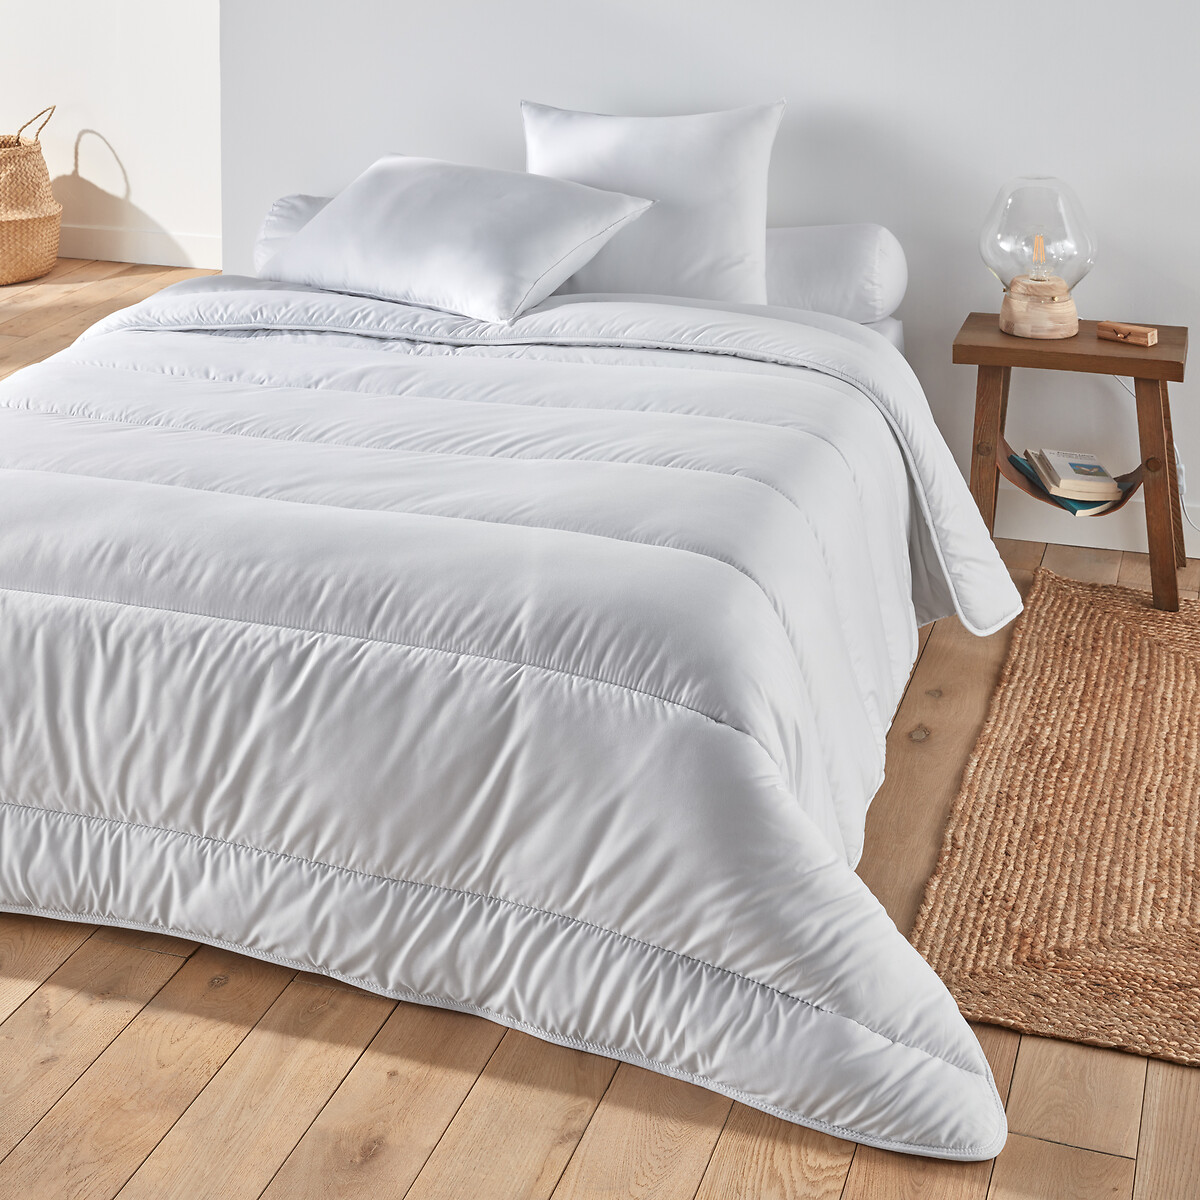 Anti Dust Mite Synthetic Tempered Duvet